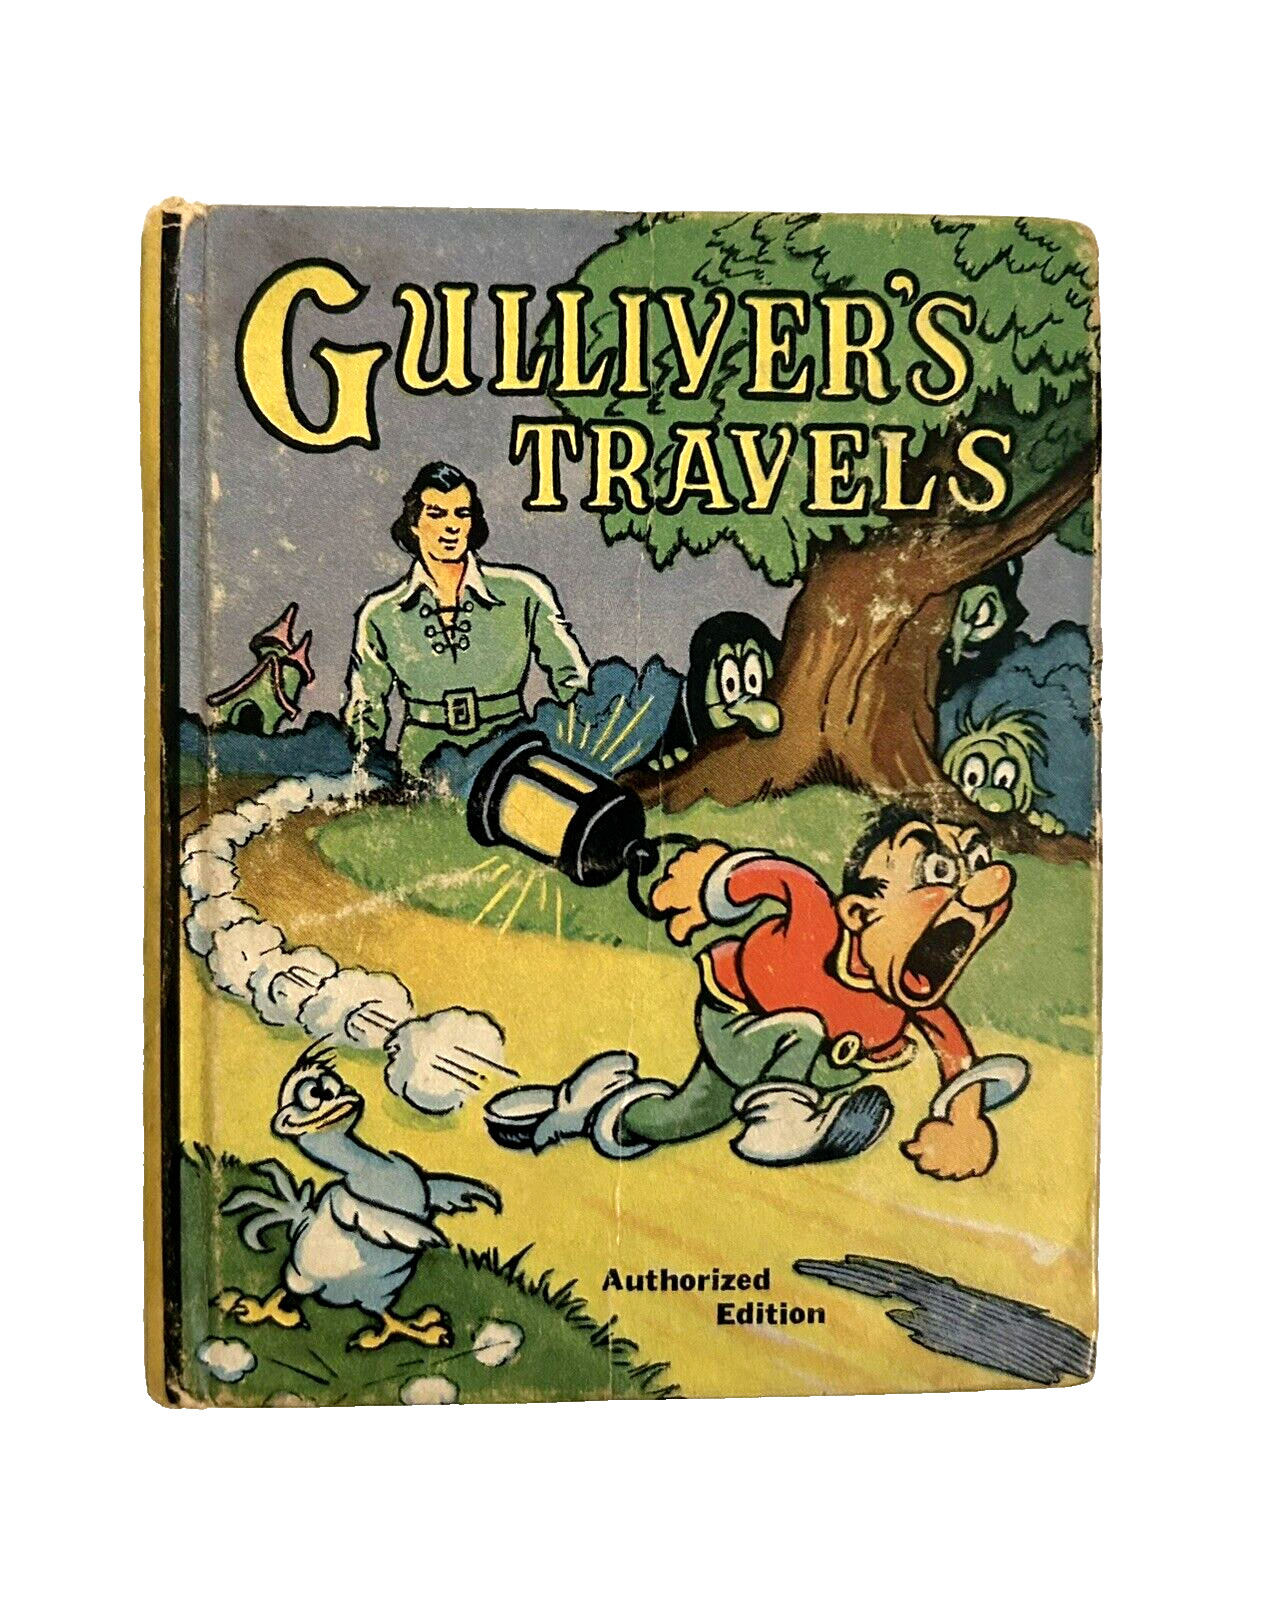 1939 Big Little Book-Gulliver's Travels-#1172- Authorized Edition-Charles Taylor